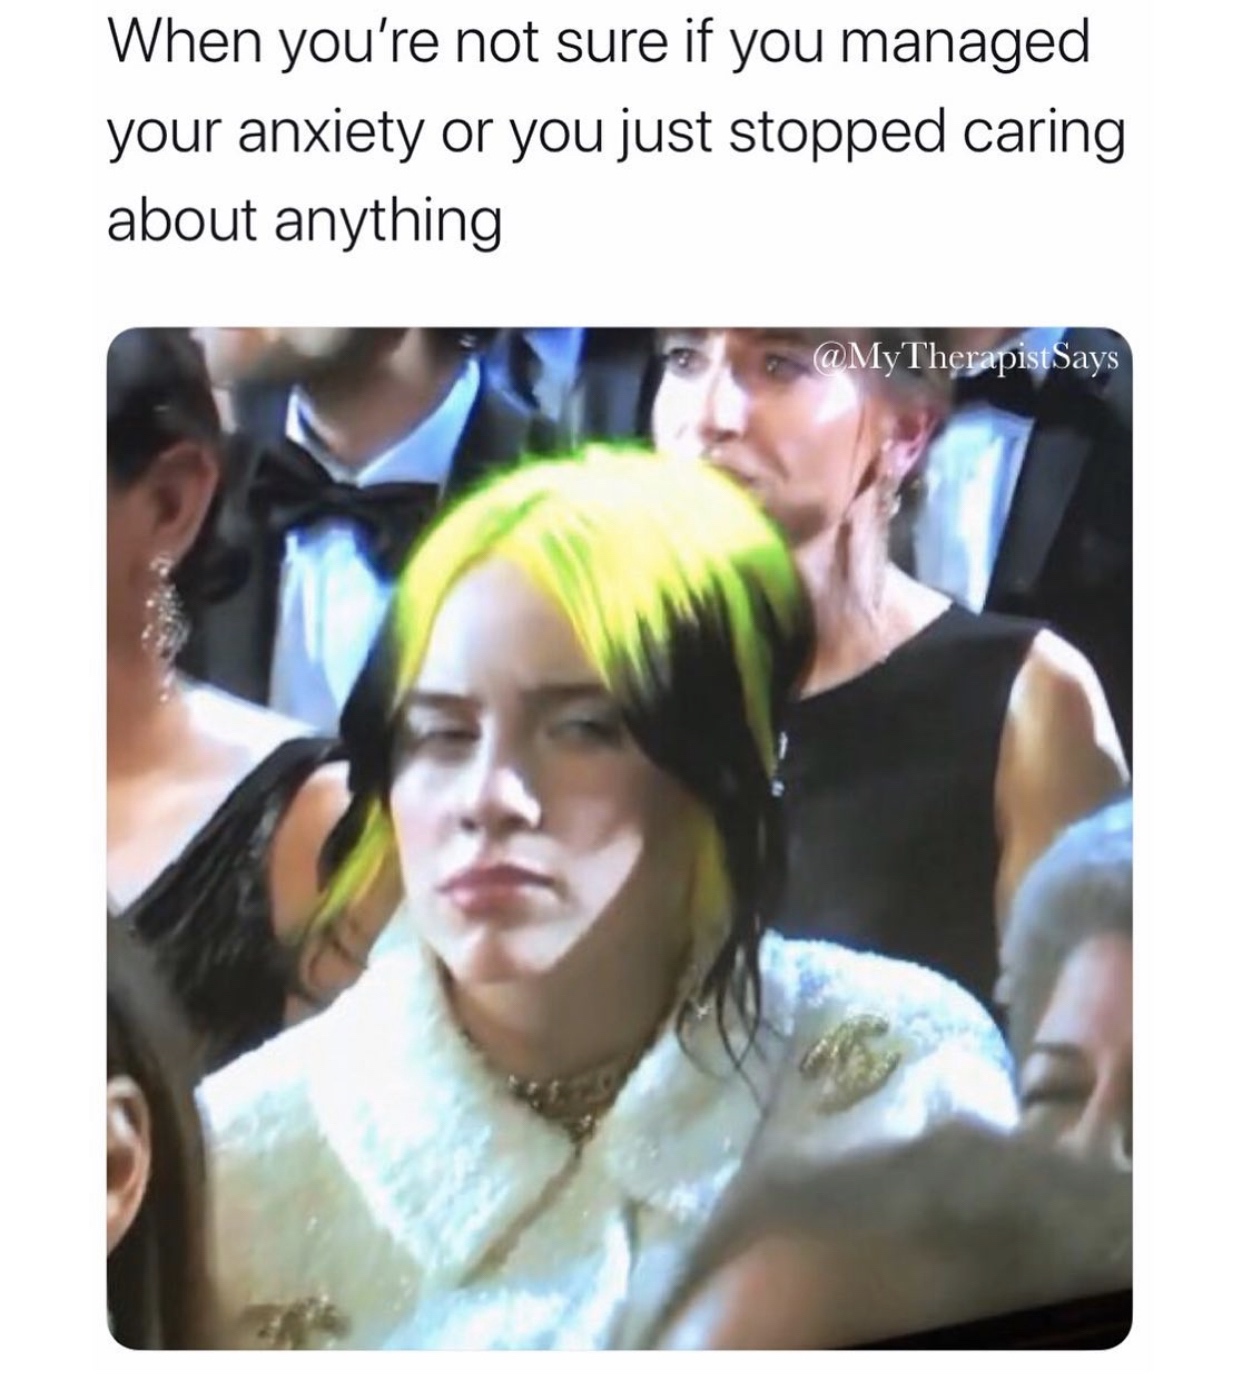 photo caption - When you're not sure if you managed your anxiety or you just stopped caring about anything Says